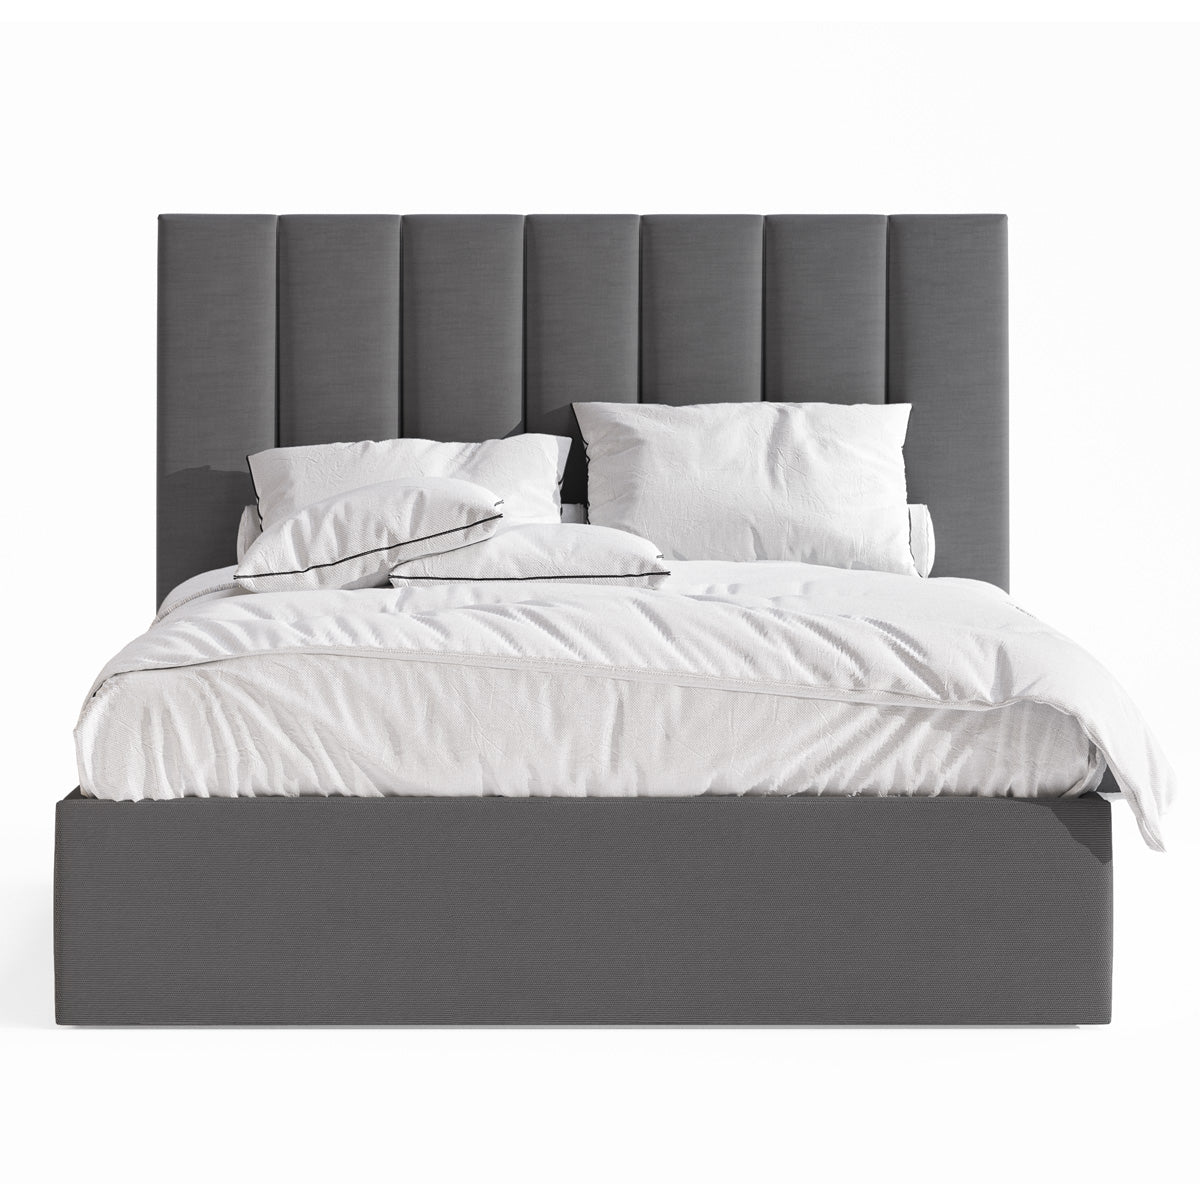 Celine Gas Lift Storage Bed Frame (Charcoal Fabric)